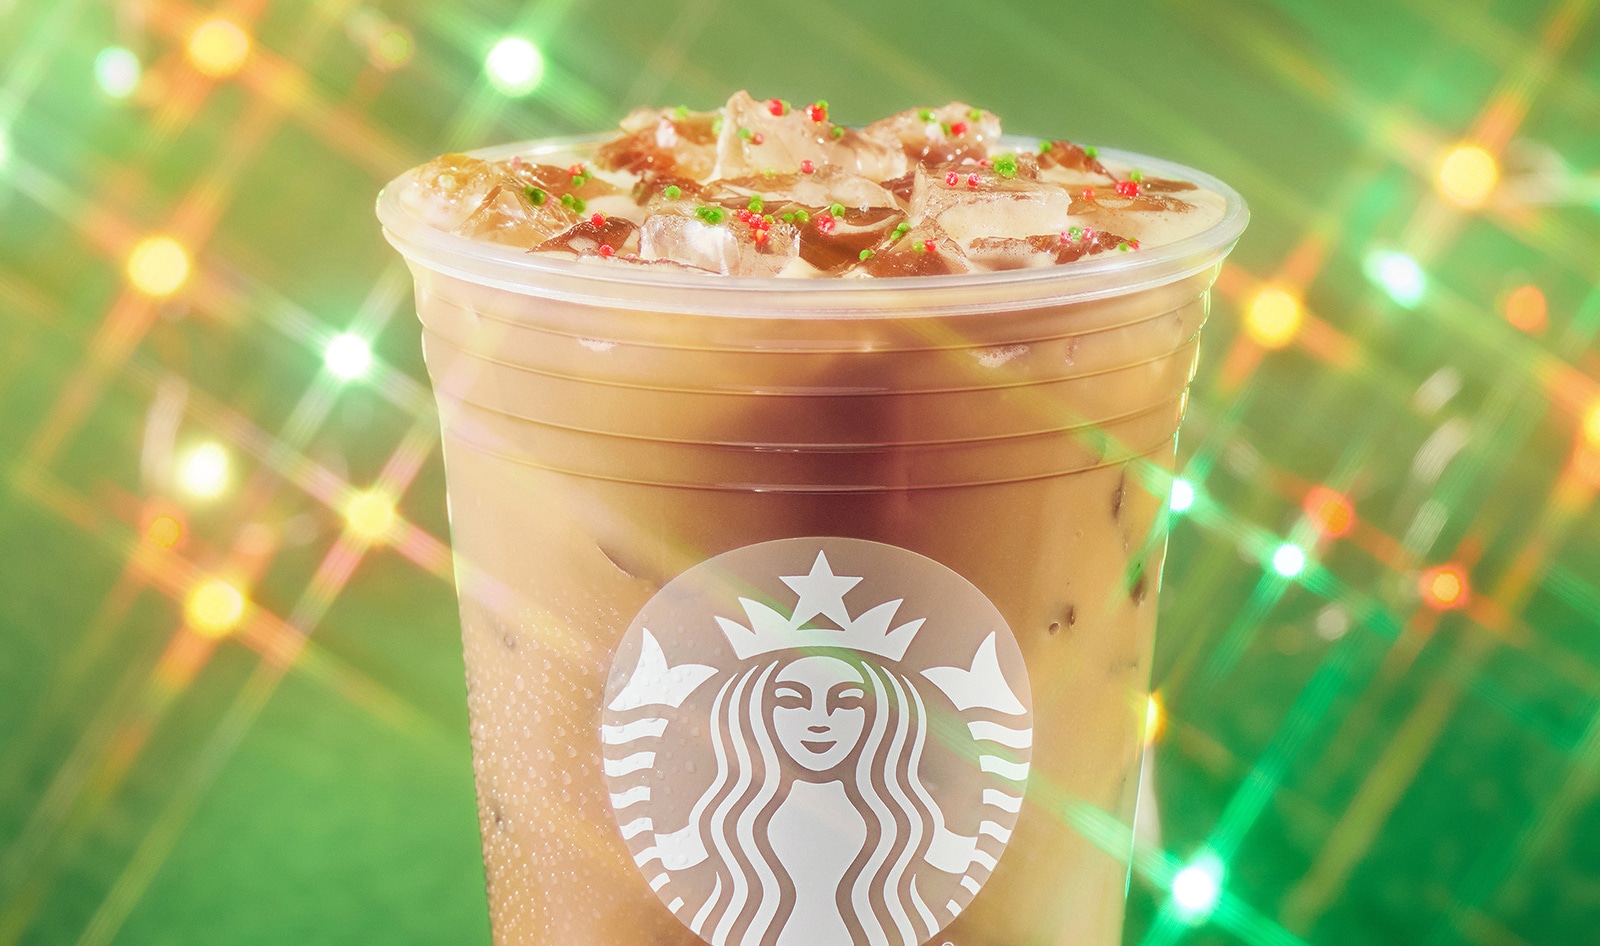 Starbucks' First-Ever Vegan Holiday Drink Is Inspired by Sugar Cookies&nbsp;